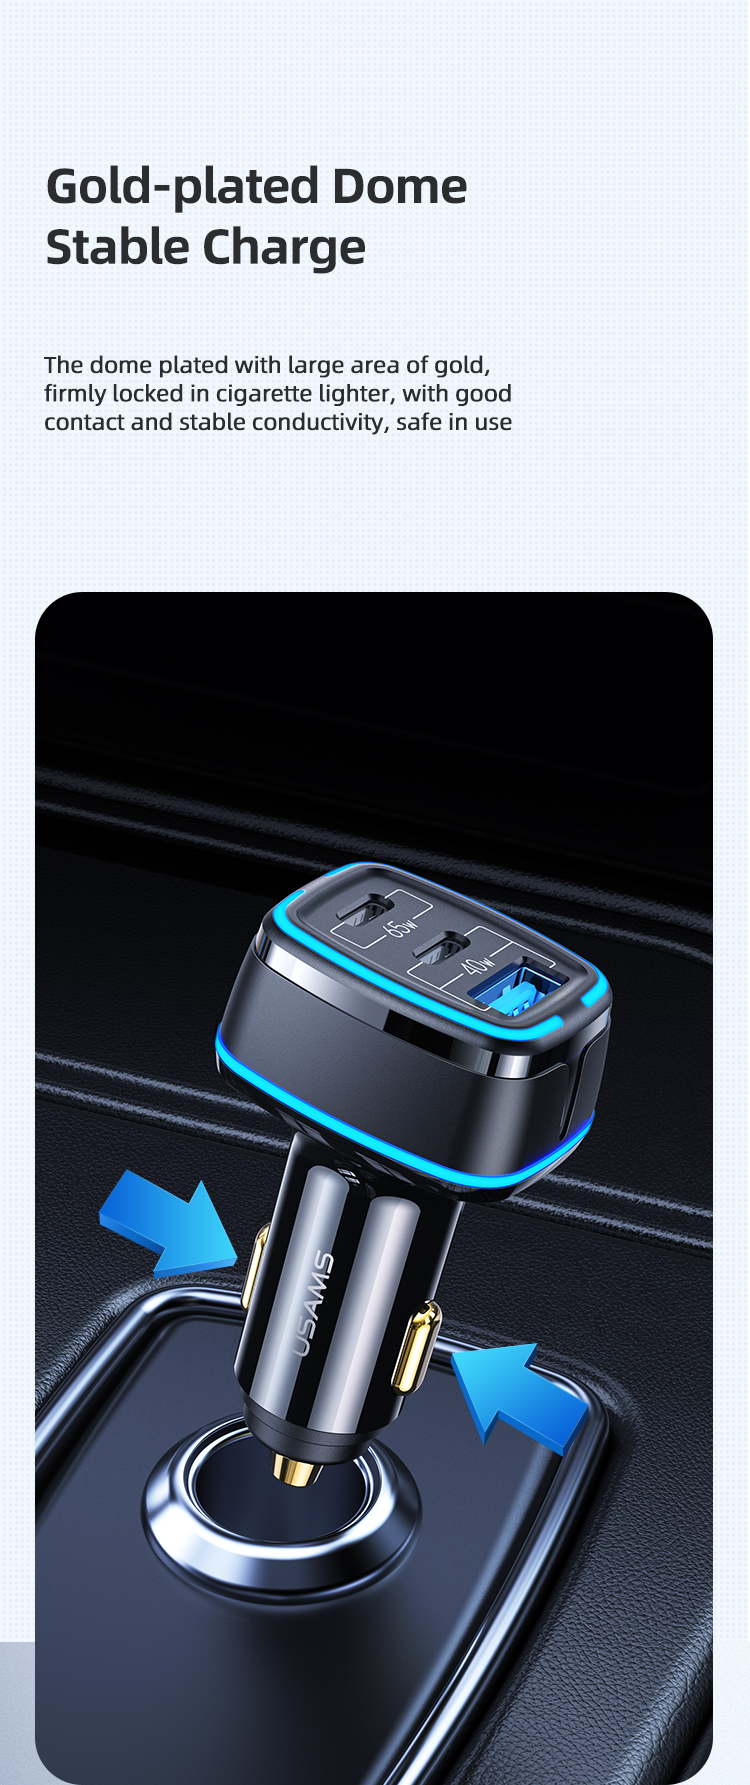 USAMS US-CC141 C24 105W 3 Ports Fast Car Charger Adapter 65W USB-C PD QC4.0 20W QC3.0 Support AFC FCP SCP PPS Fast Charging With Blue LED For iPhone 12 12 Mini 12 Pro Max For Samsung Galaxy Note 20 Huawei Mate 40 OnePlus 8T Xiaomi Mi10